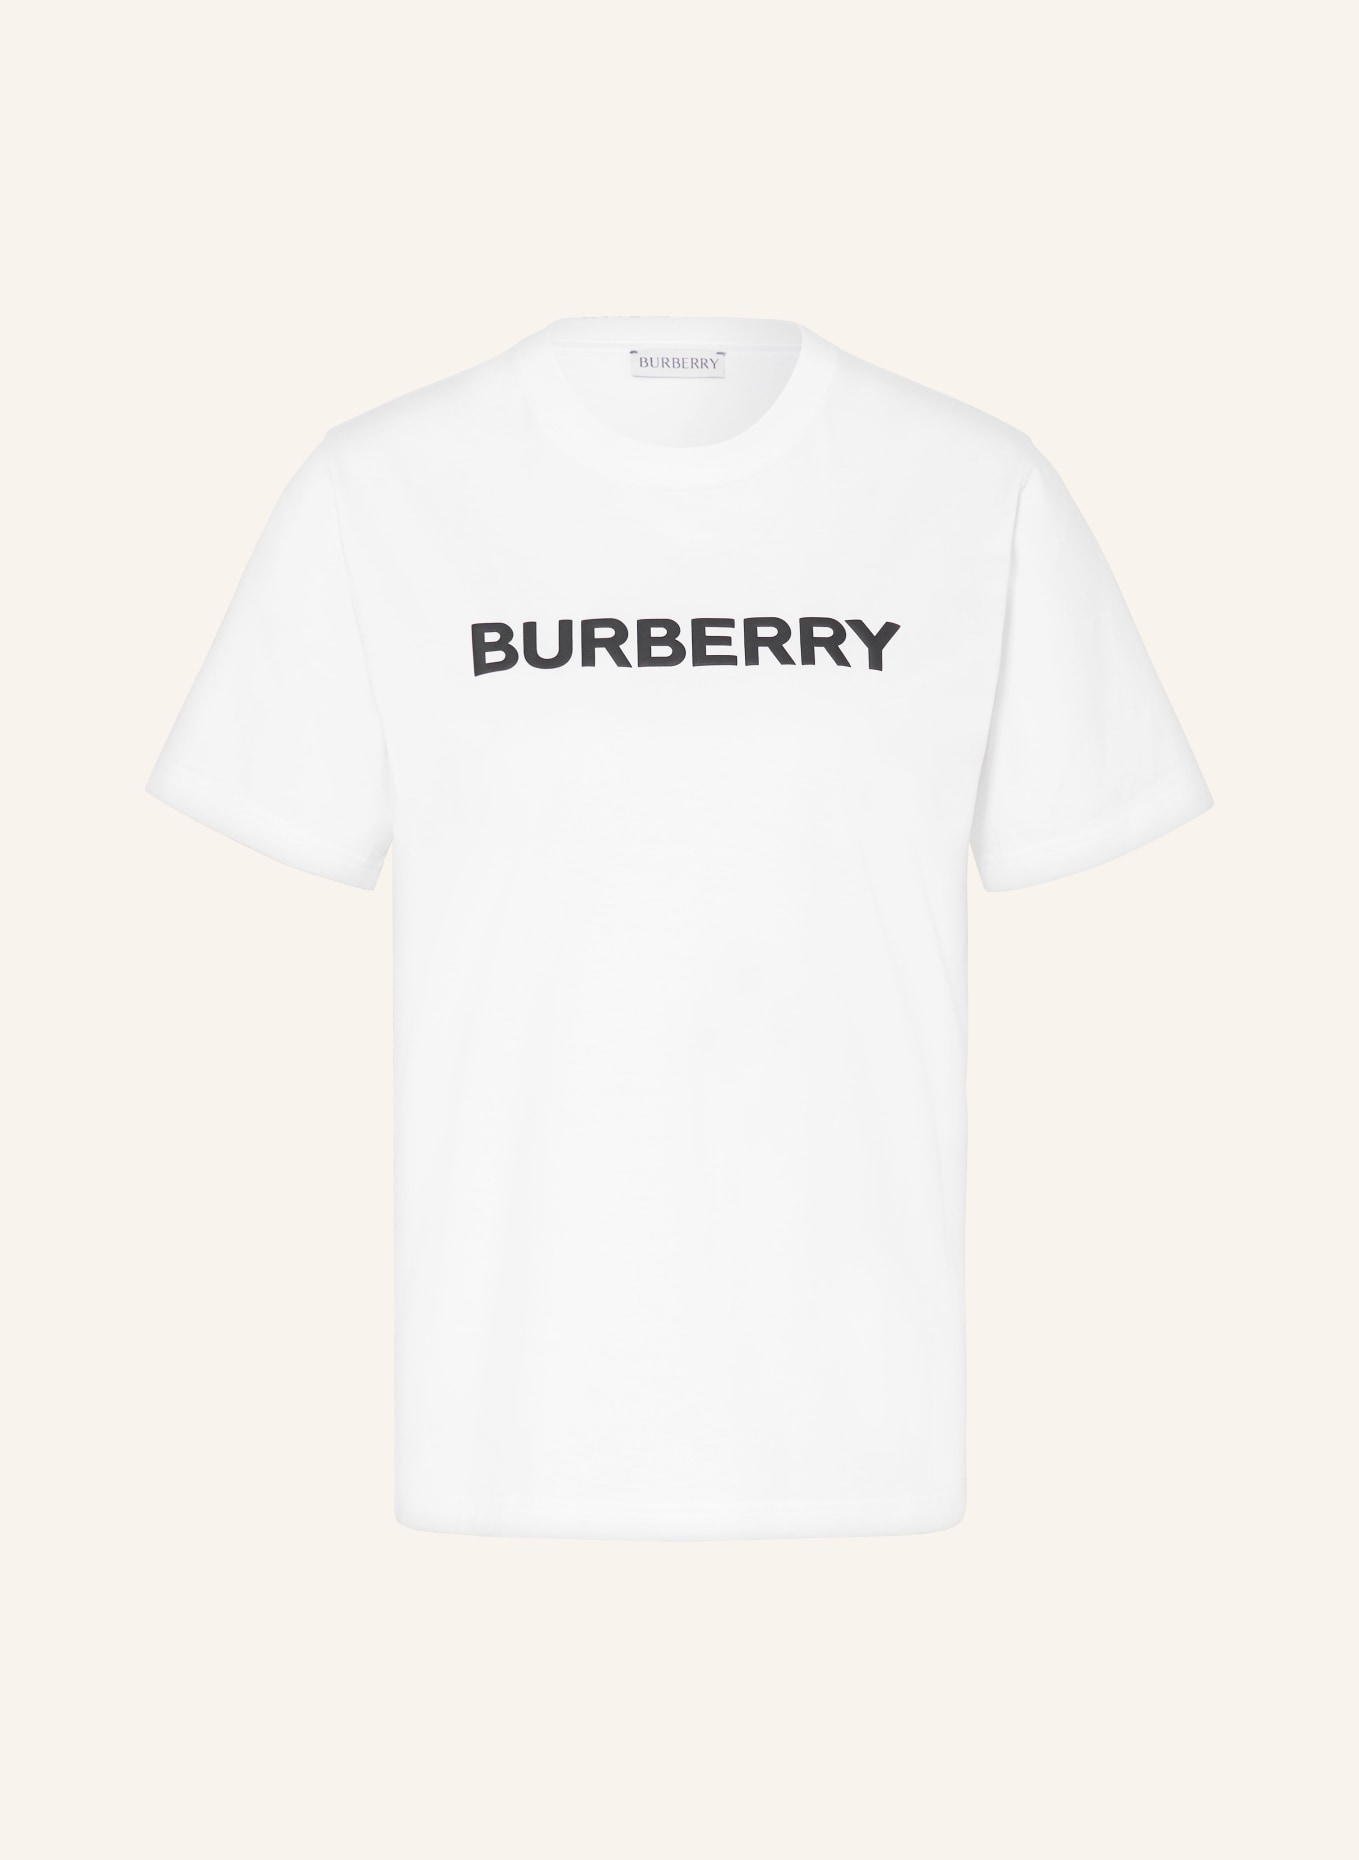 BURBERRY T-shirt MARGOT, Color: WHITE (Image 1)